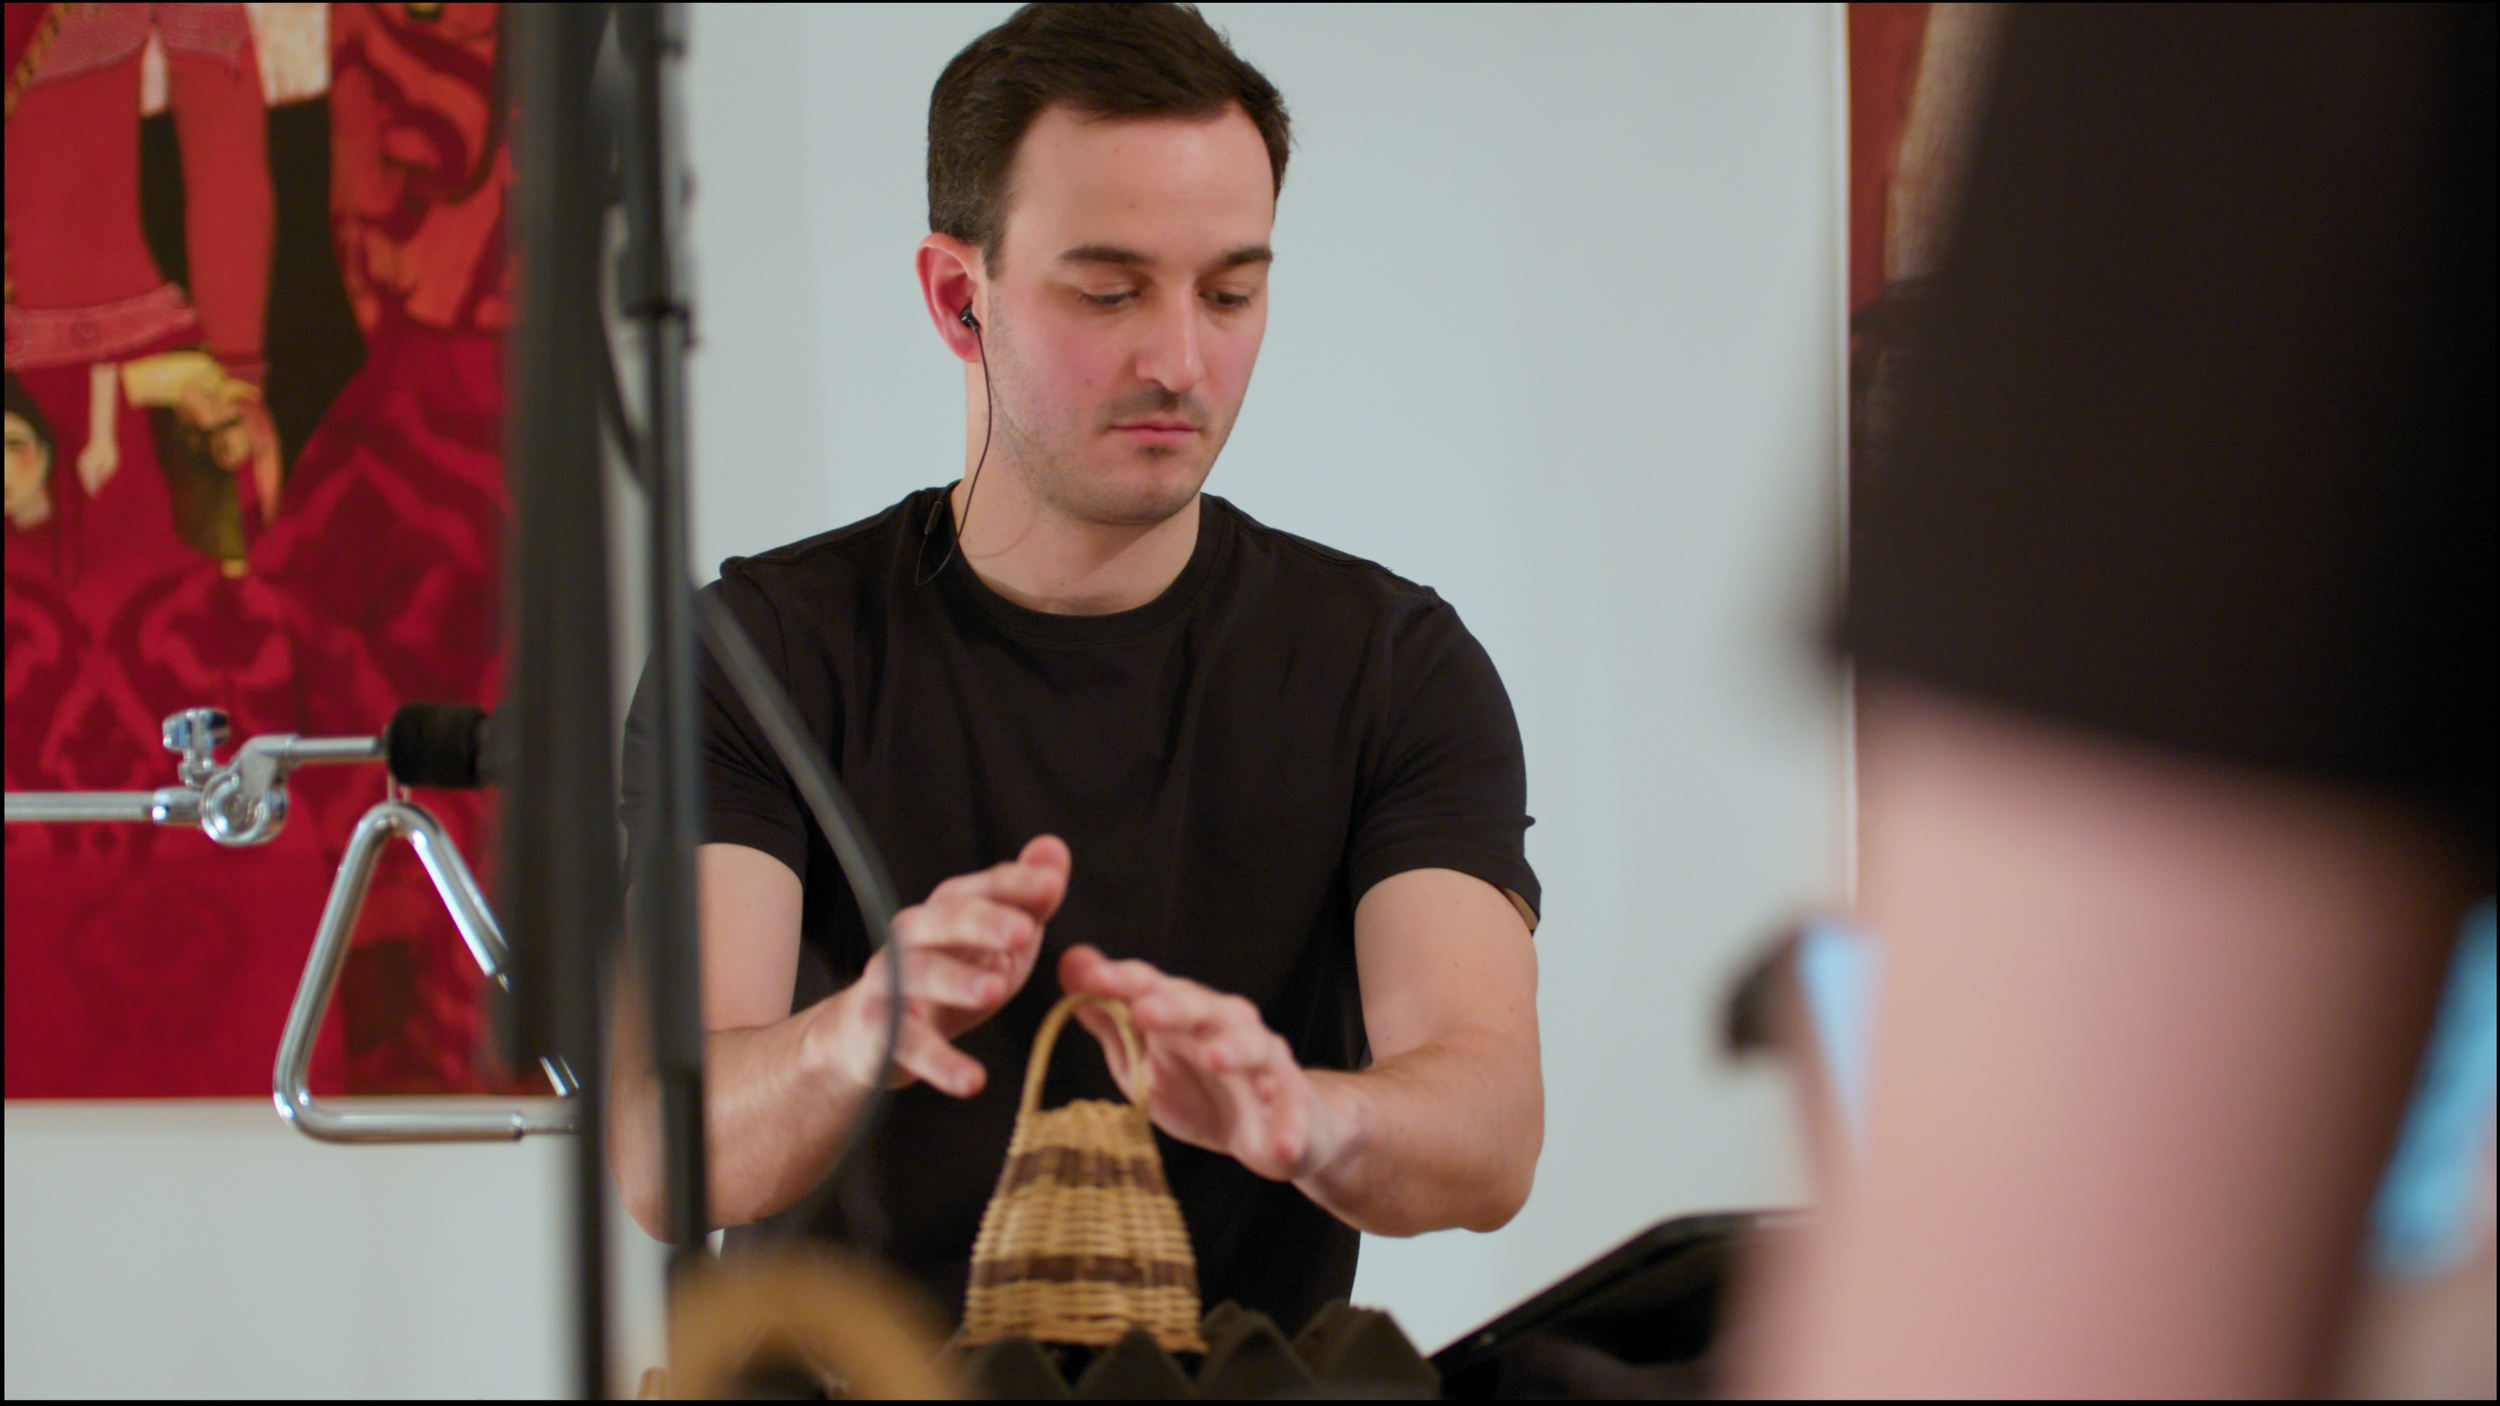 4. A close-up image of a percussionist playing a caxixi with their fingertips. The caxixi is a brown, shaker-like instrument, and is placed on a foam pad.